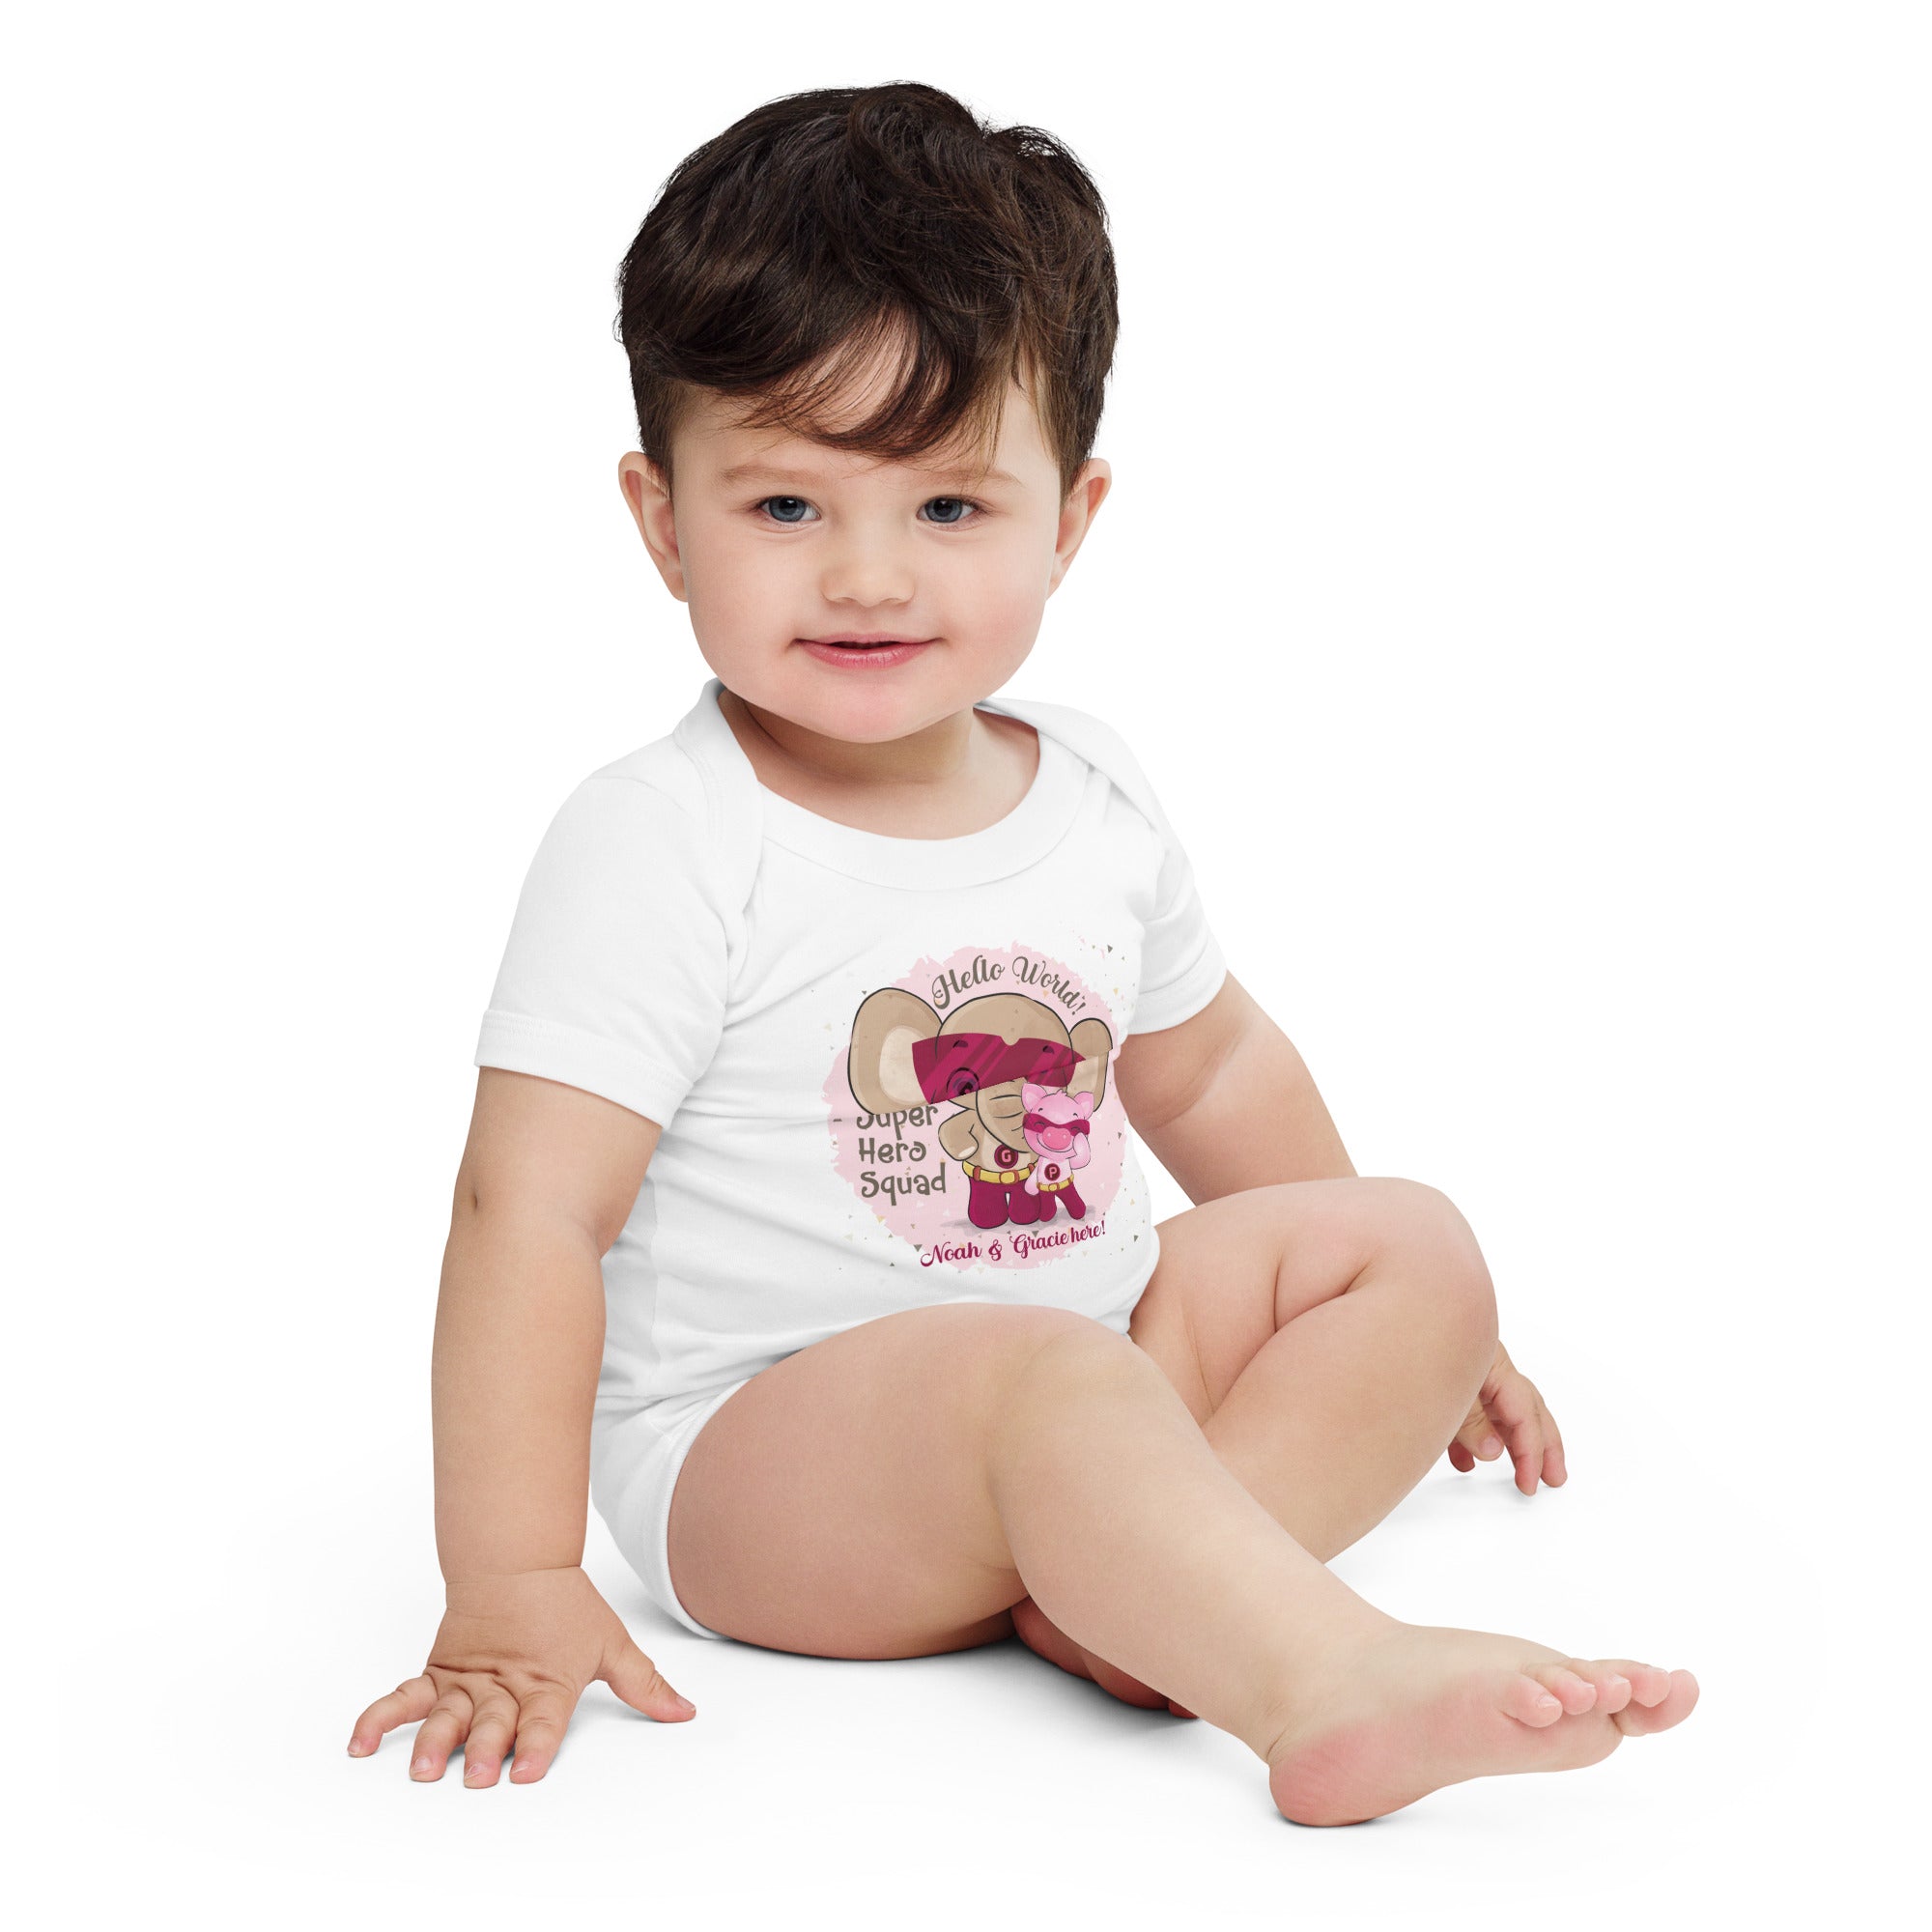  Organic cotton baby bodysuit, Personalised baby bio, Personalised gifts for new baby, 